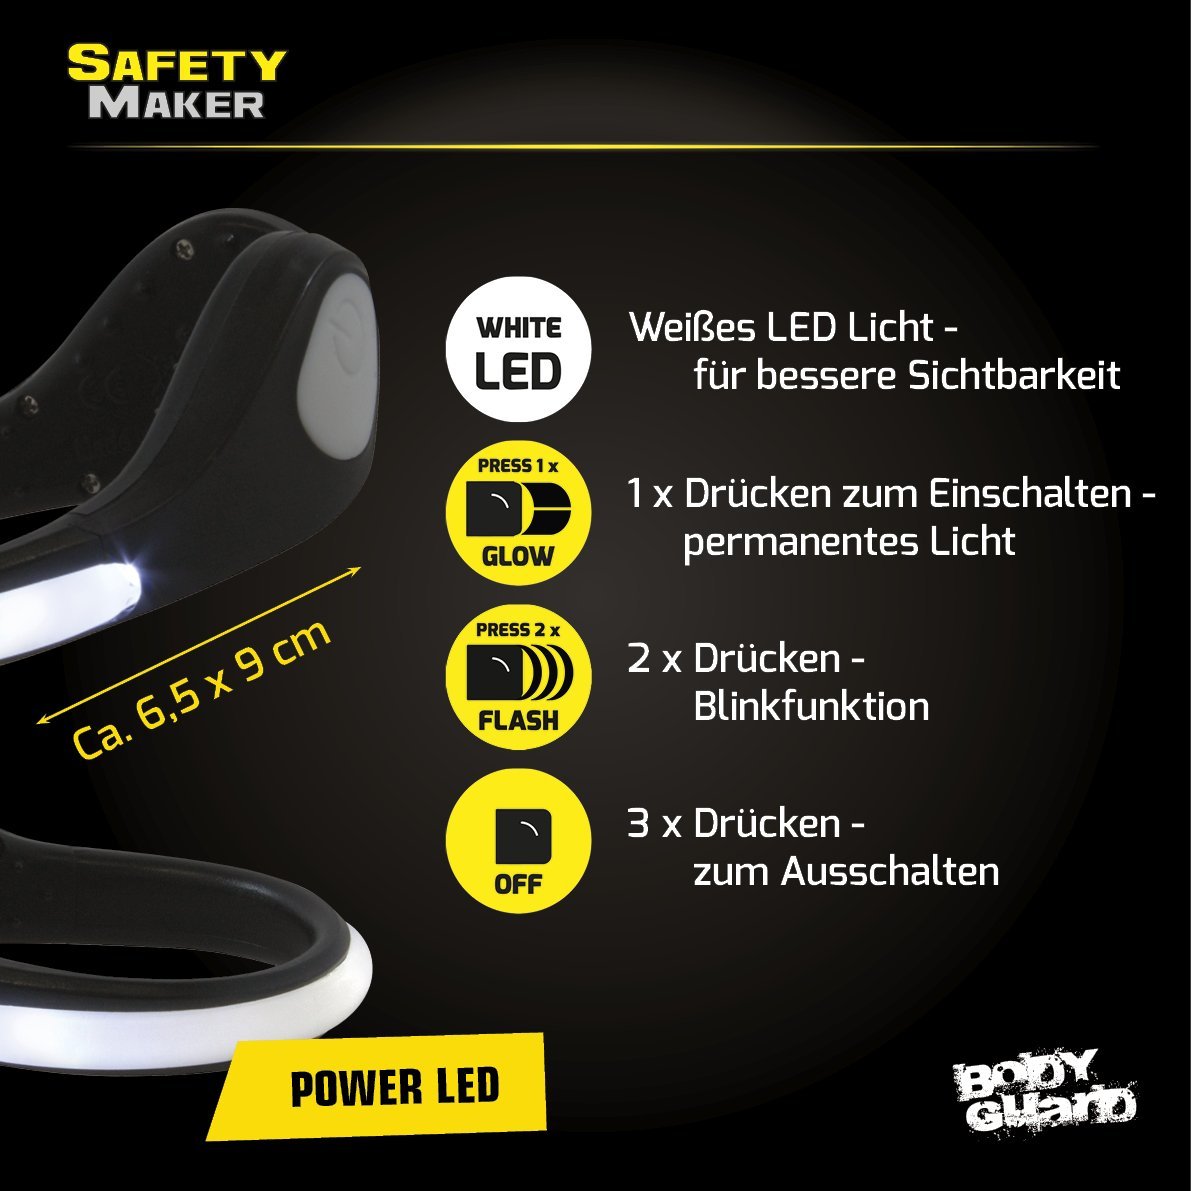 LED Schuh Clip weiß, LED Schuhclips, Lifestyle